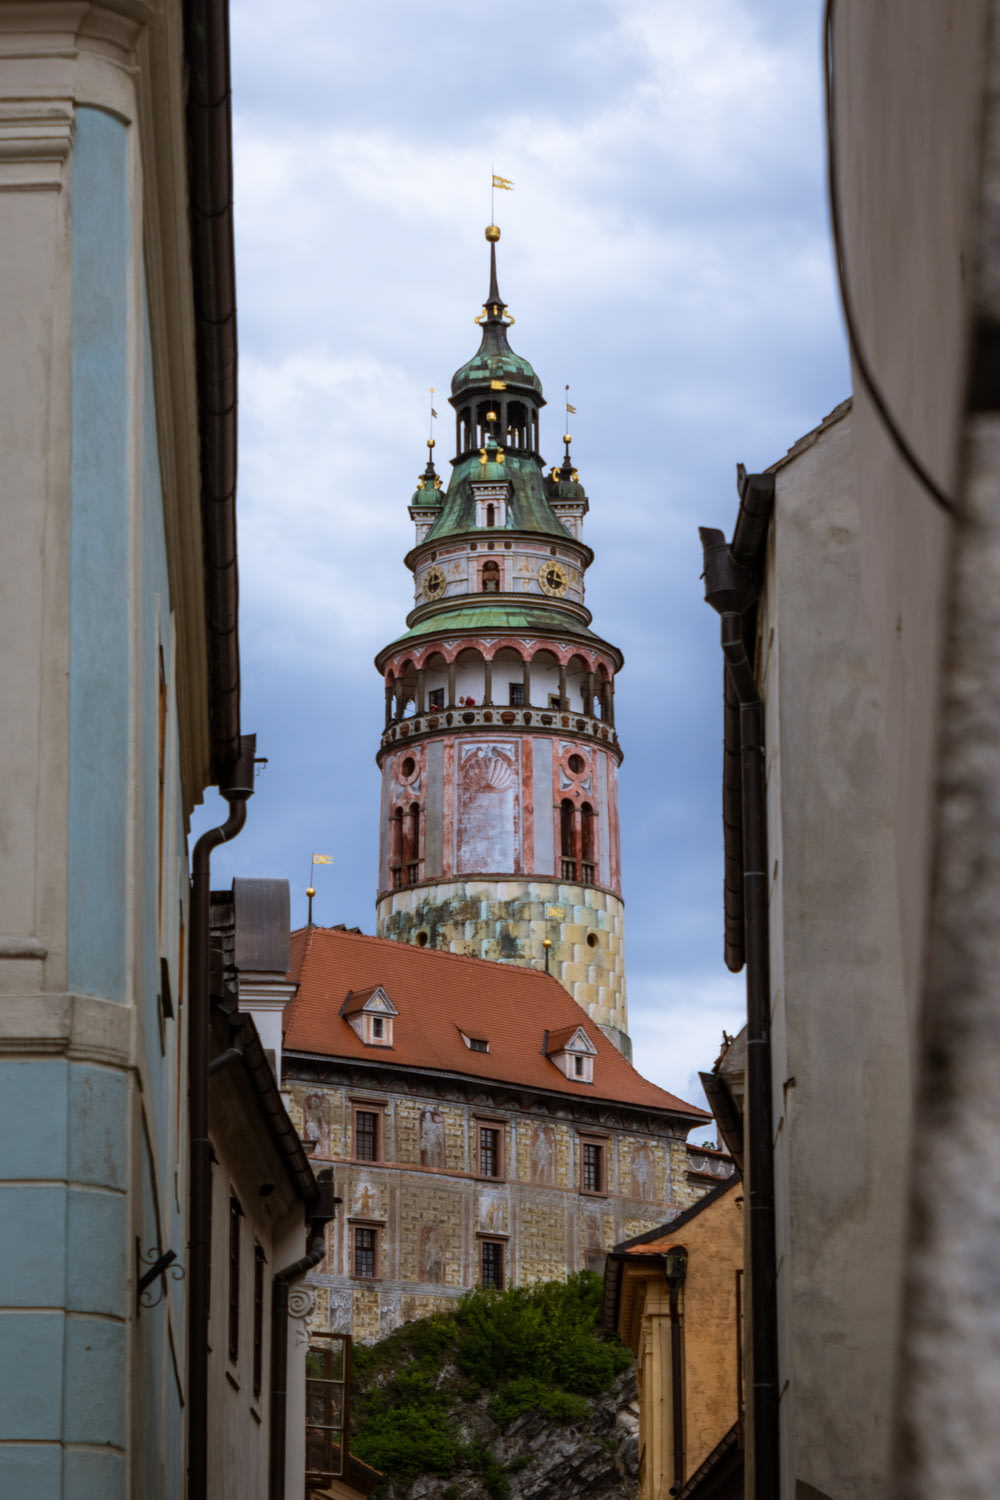 pink and white tower at daytime